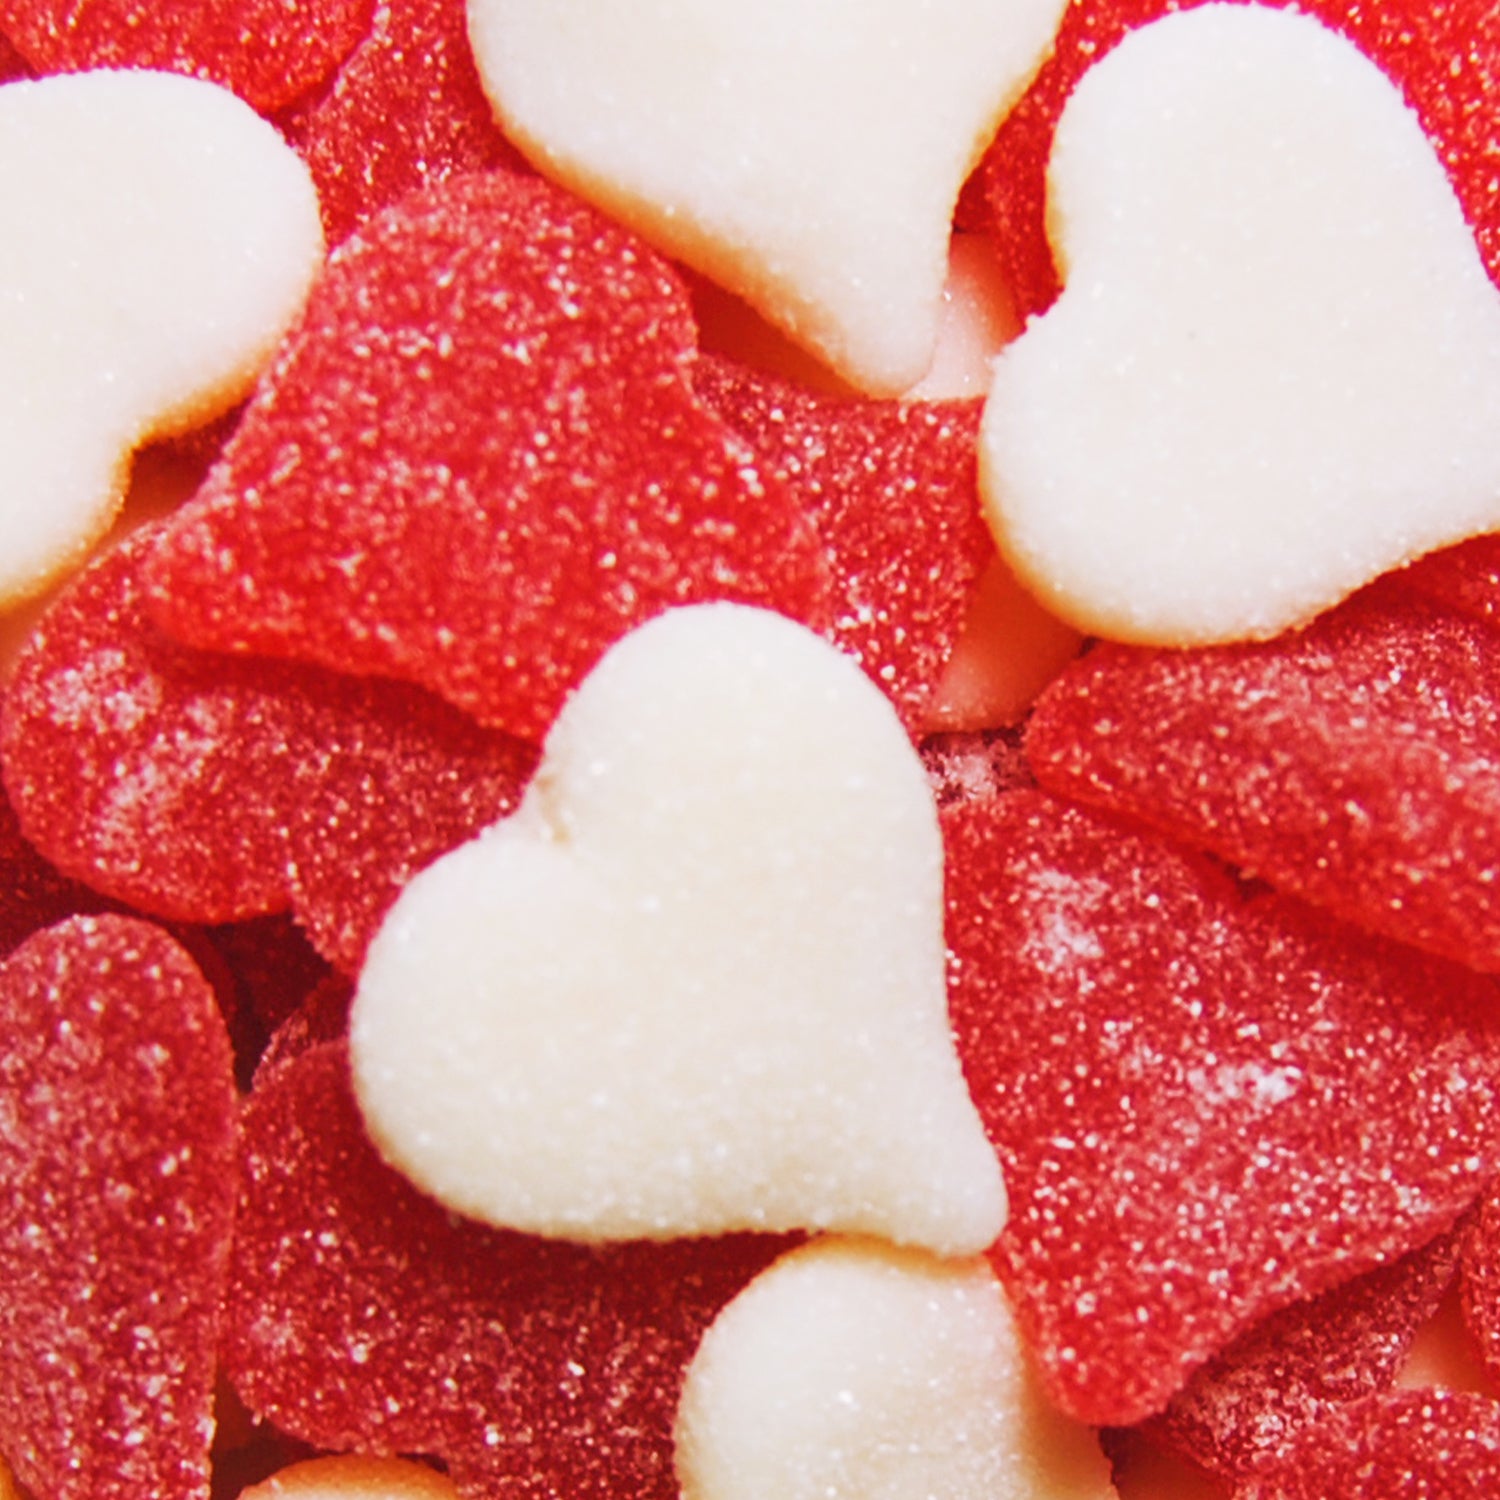 Red and White sour hearts